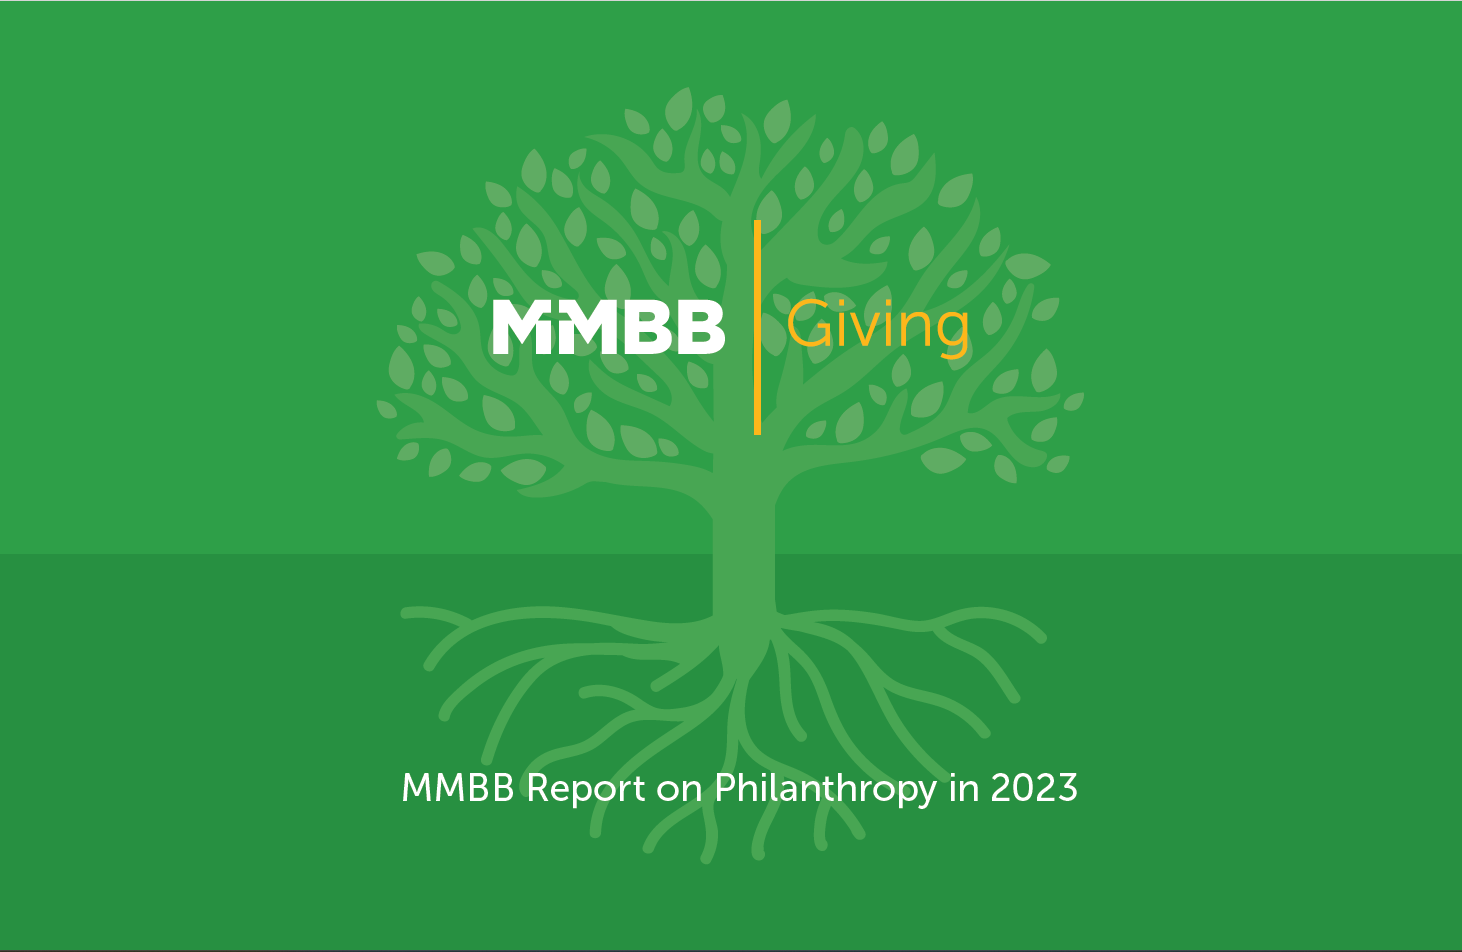 MMBB Report on Philanthropy in 2023